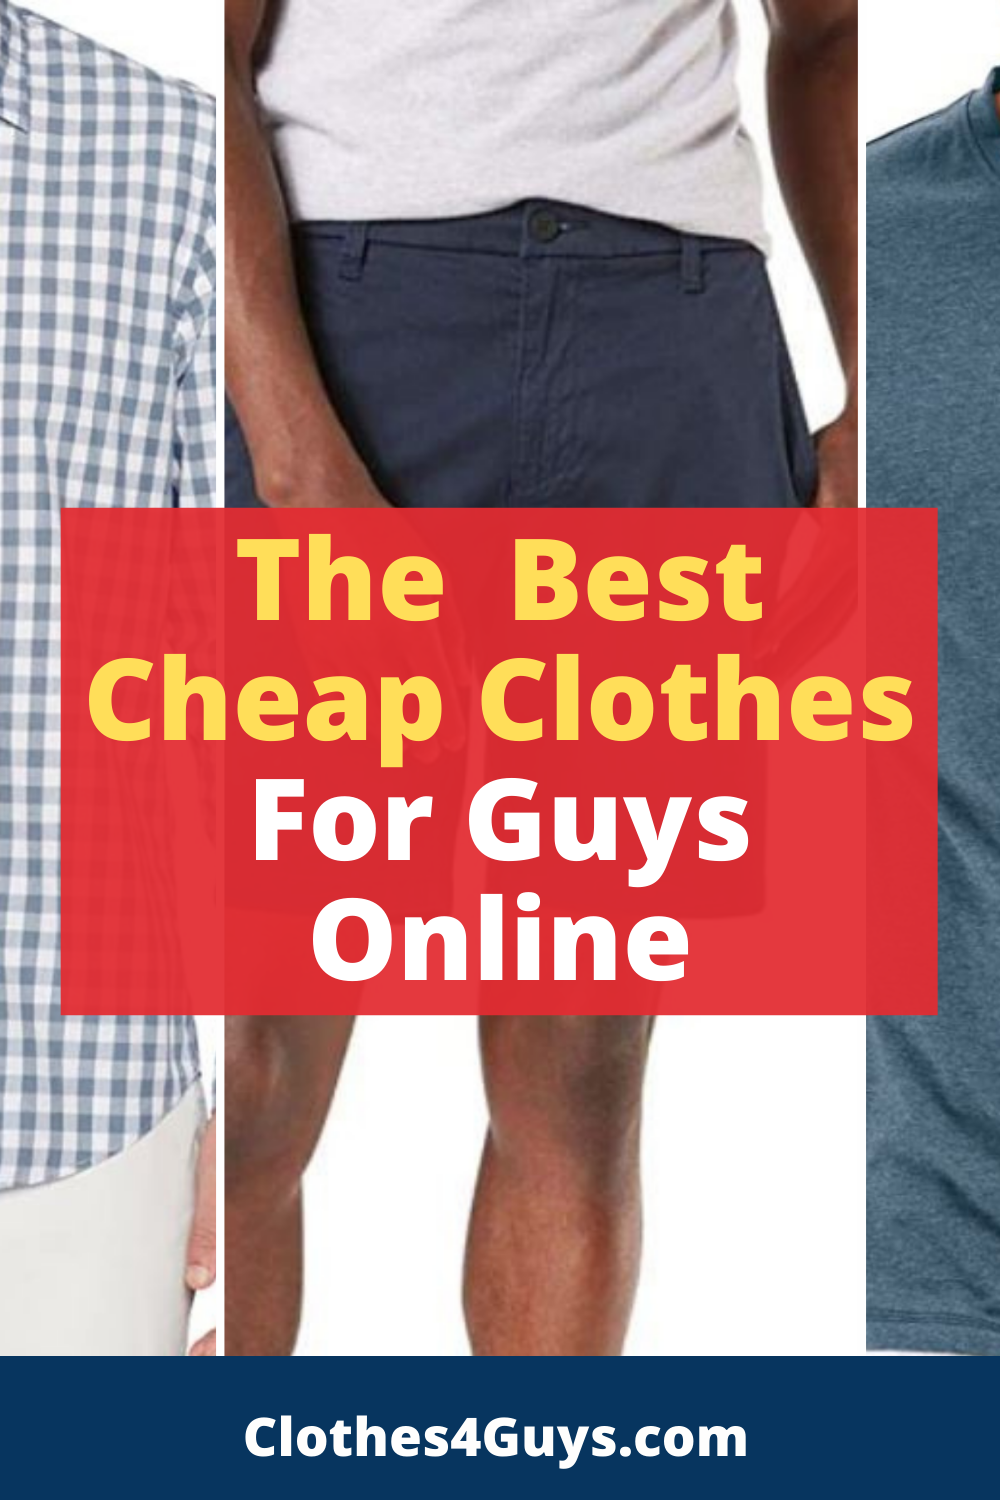 The Best Cheap Clothes for Guys Online by Clothes For Guys